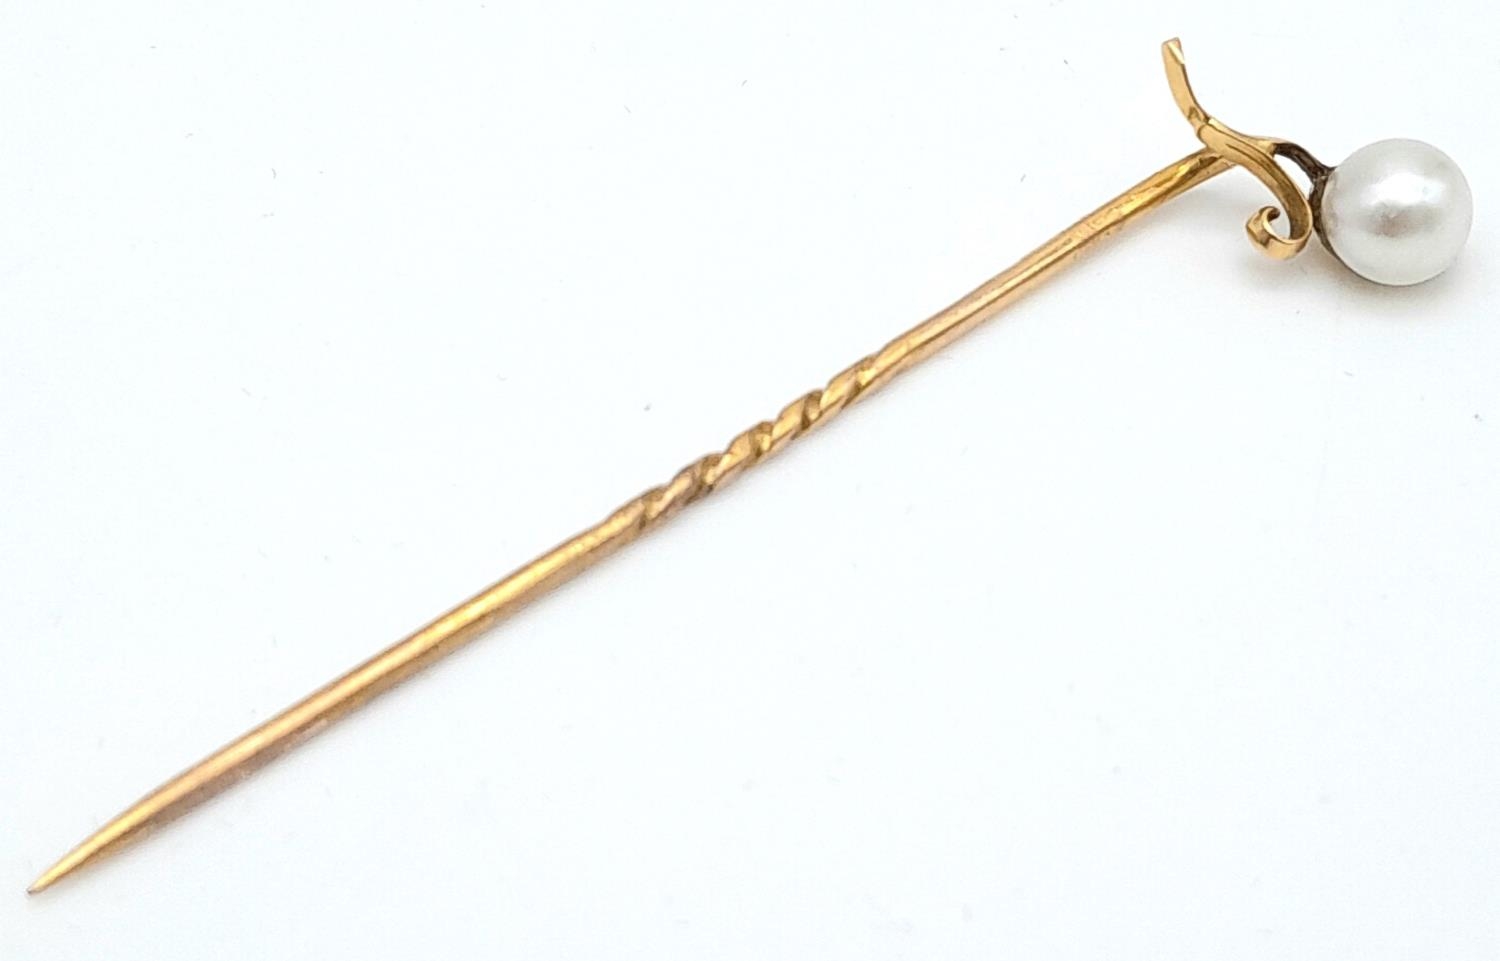 A Vintage 9K (tested) Yellow Gold Stick Pin with Pearl Decoration. 5.5cm. 1g total weight.